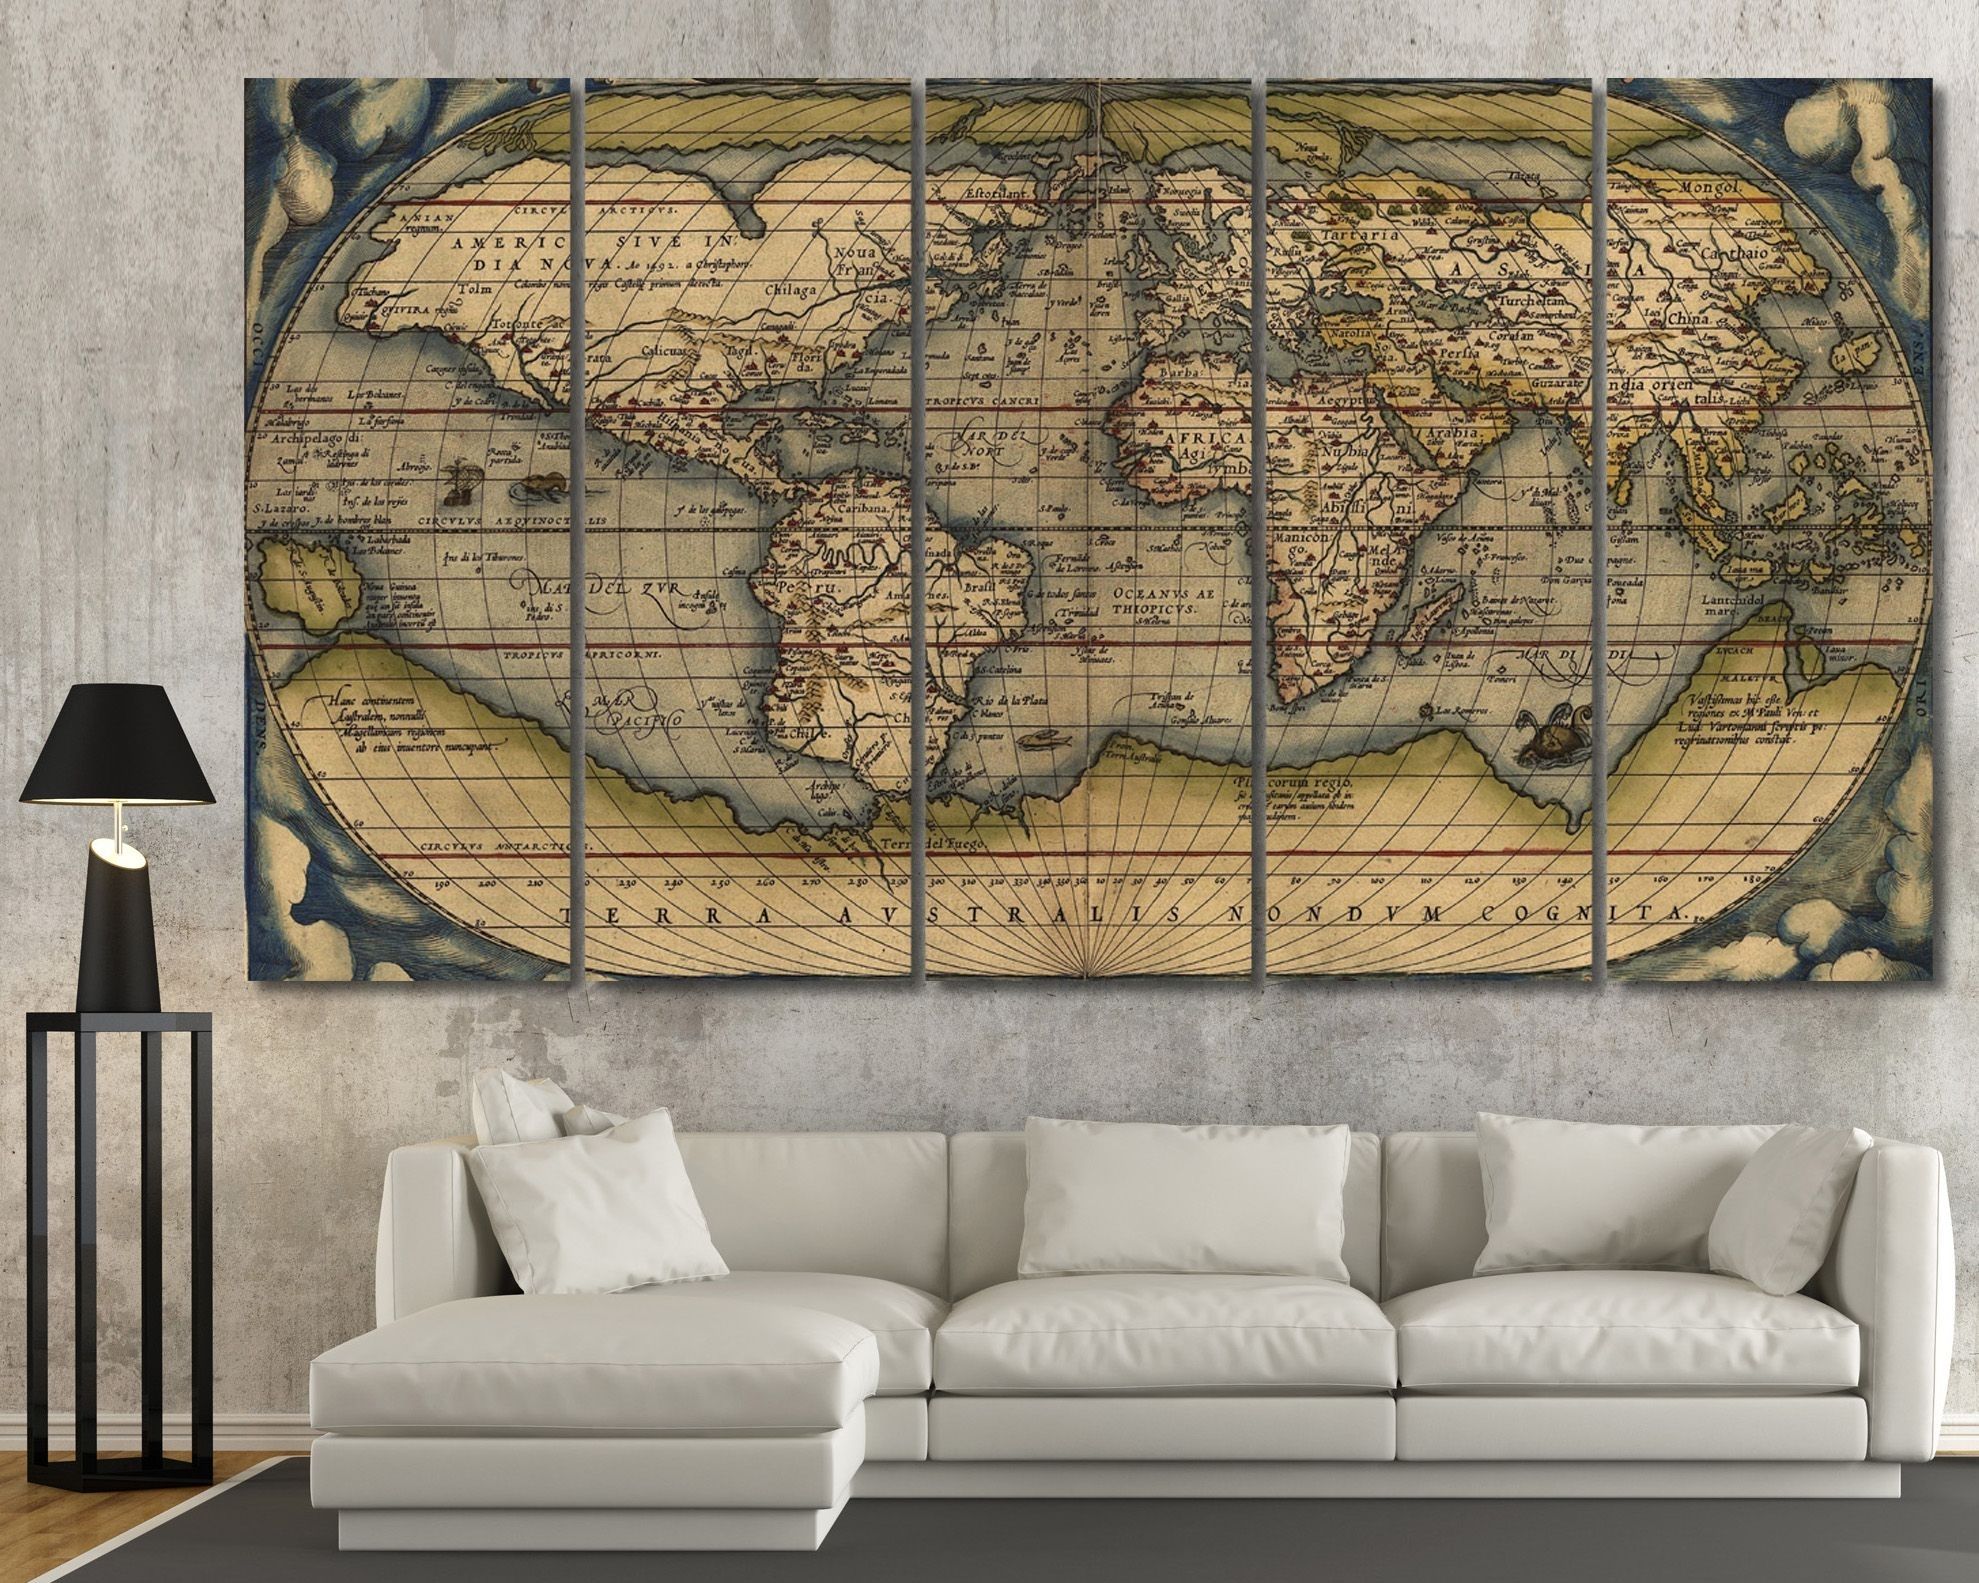 Large Vintage Wall Art Old World Map At Texelprintart | Art With Vintage Wall Art (View 3 of 20)